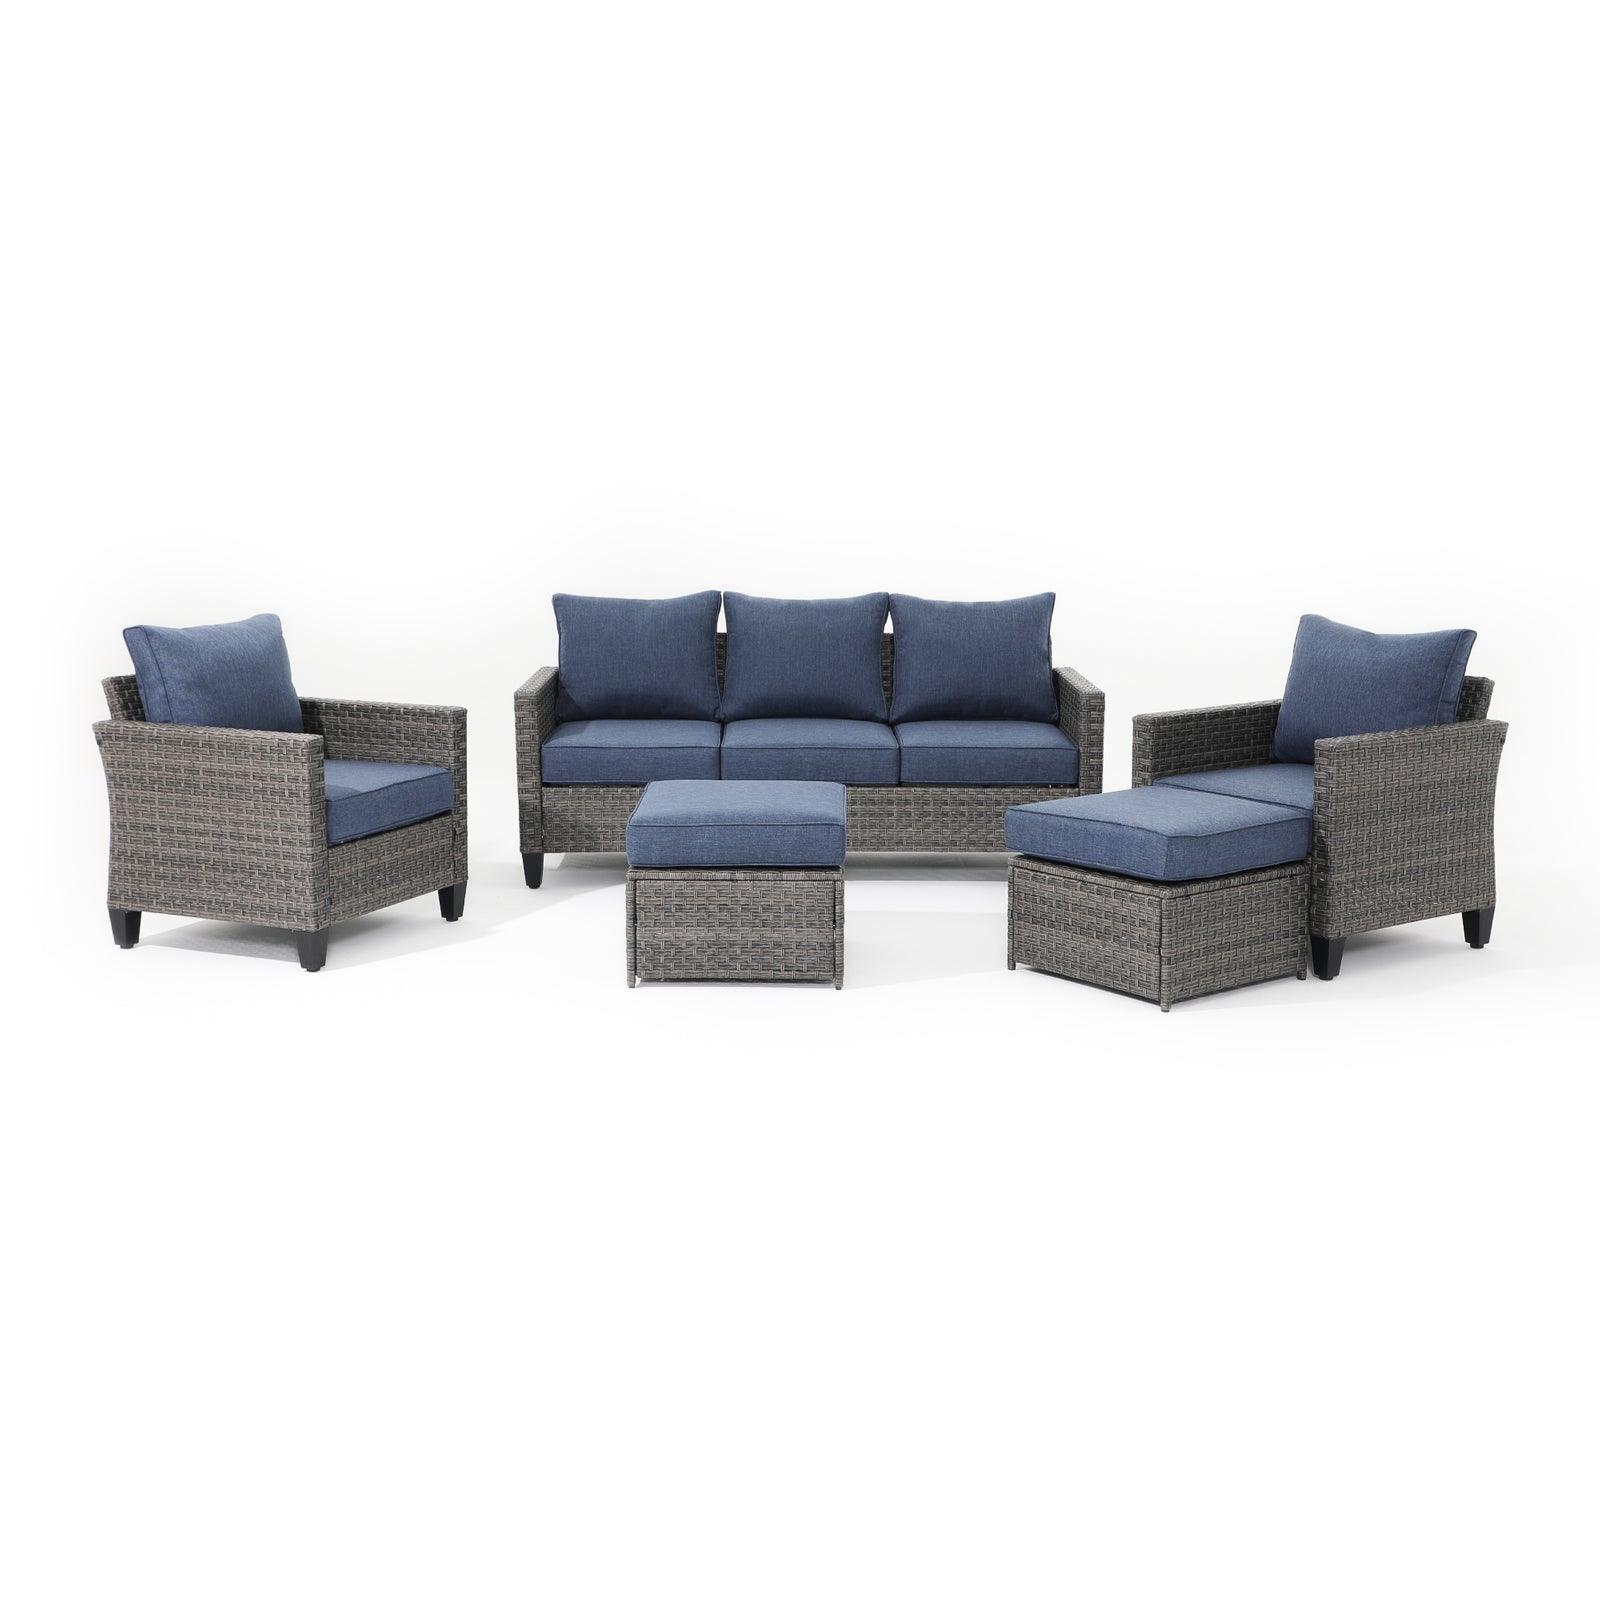 Ayia 5-Piece grey wicker outdoor Sofa Set with Navy Blue cushions, a 3-seater sofa, 2 arm chairs , 2 ottomans - Jardina Furniture  #color_Navy blue#piece_5-pc. with ottomans